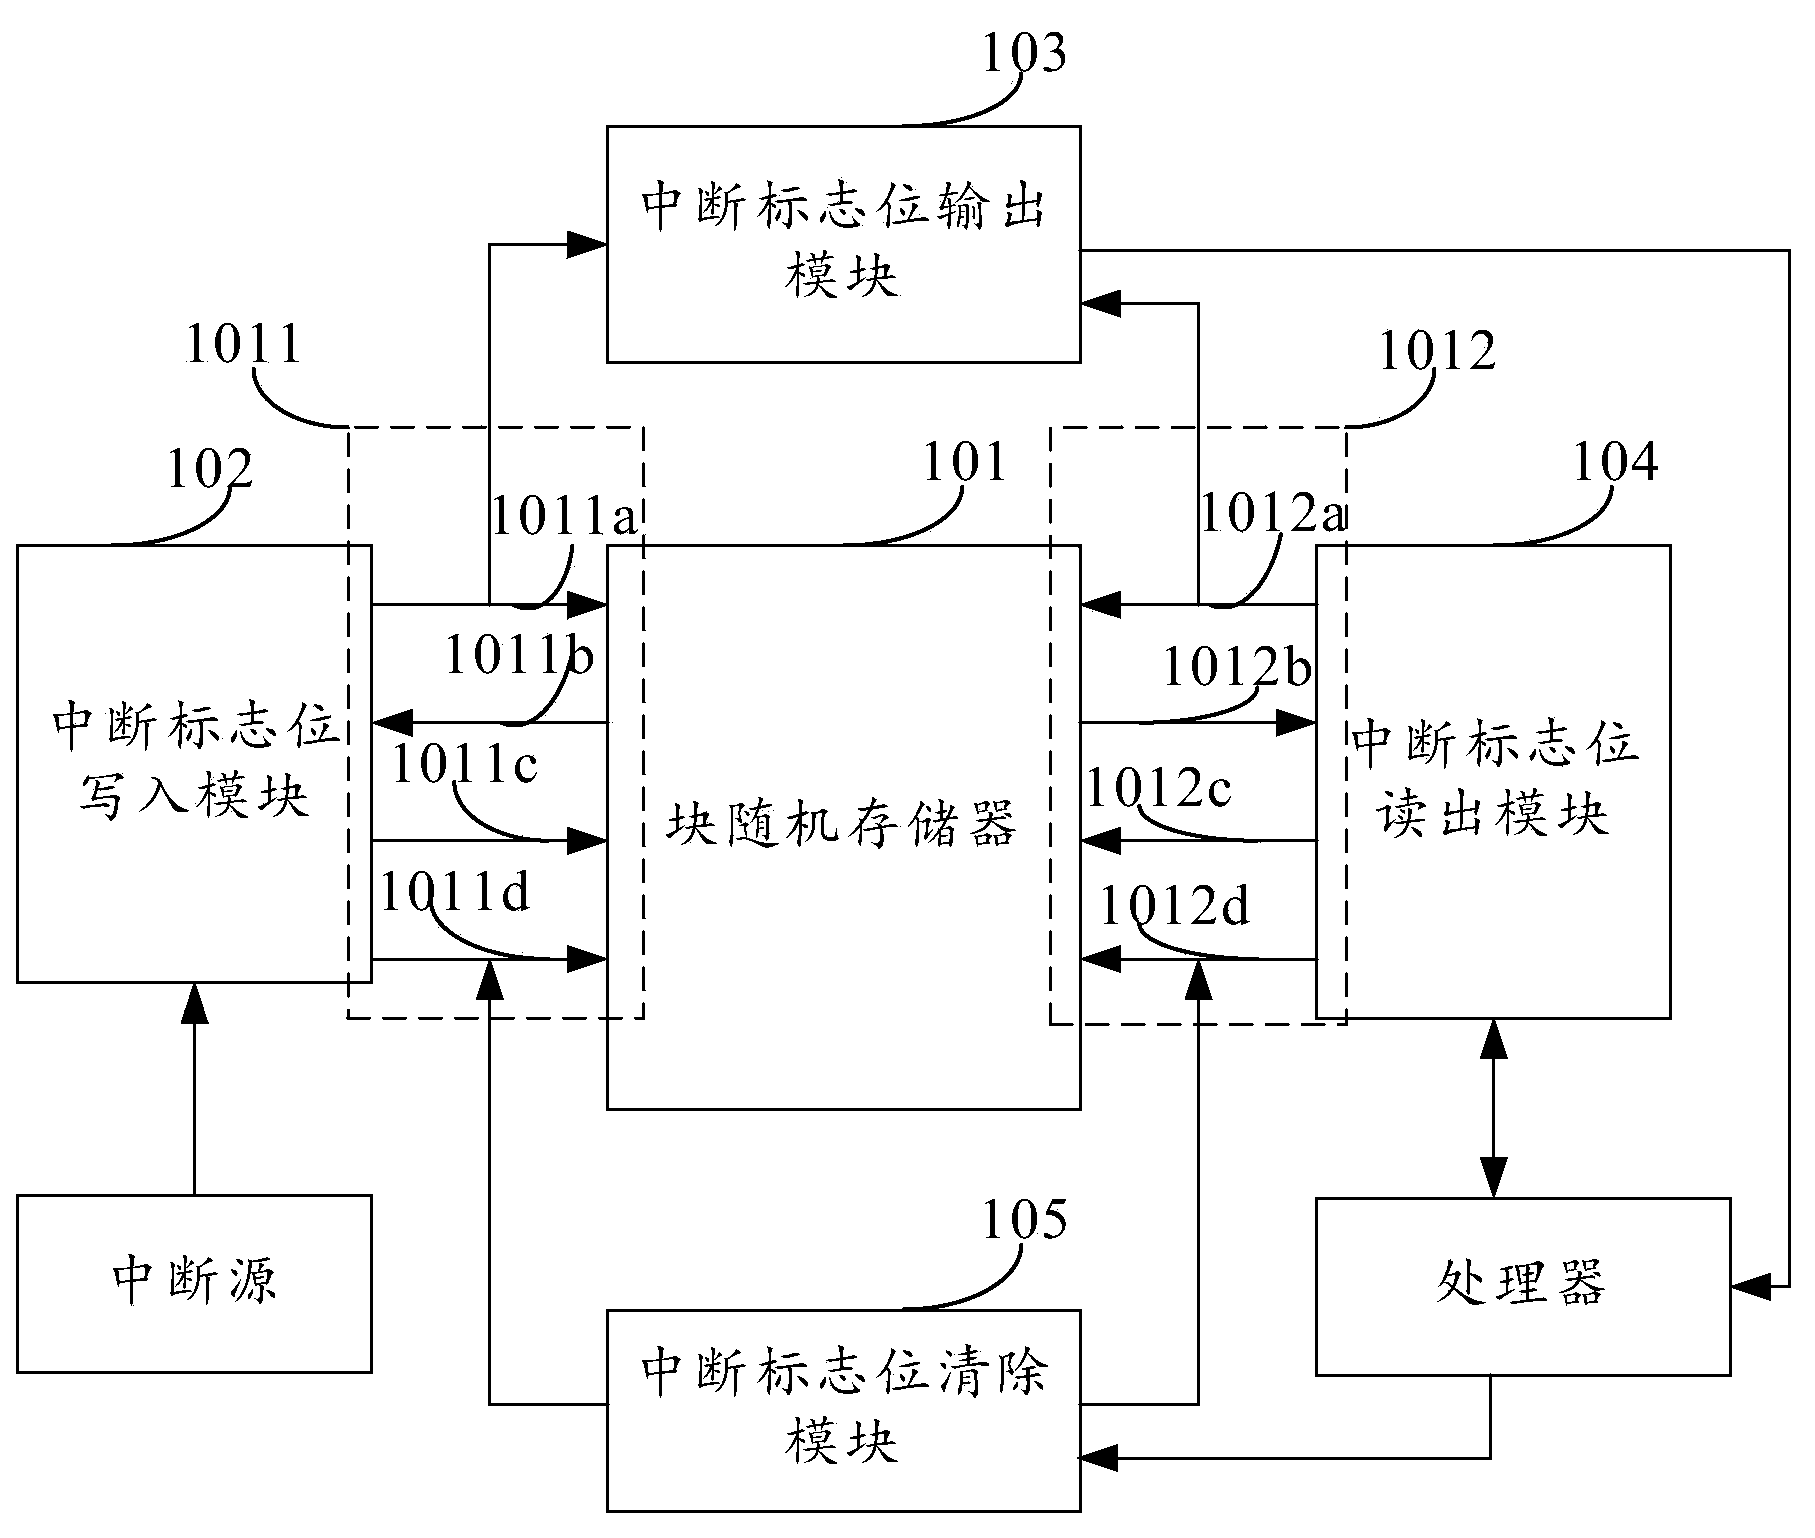 Interrupt processing device and method